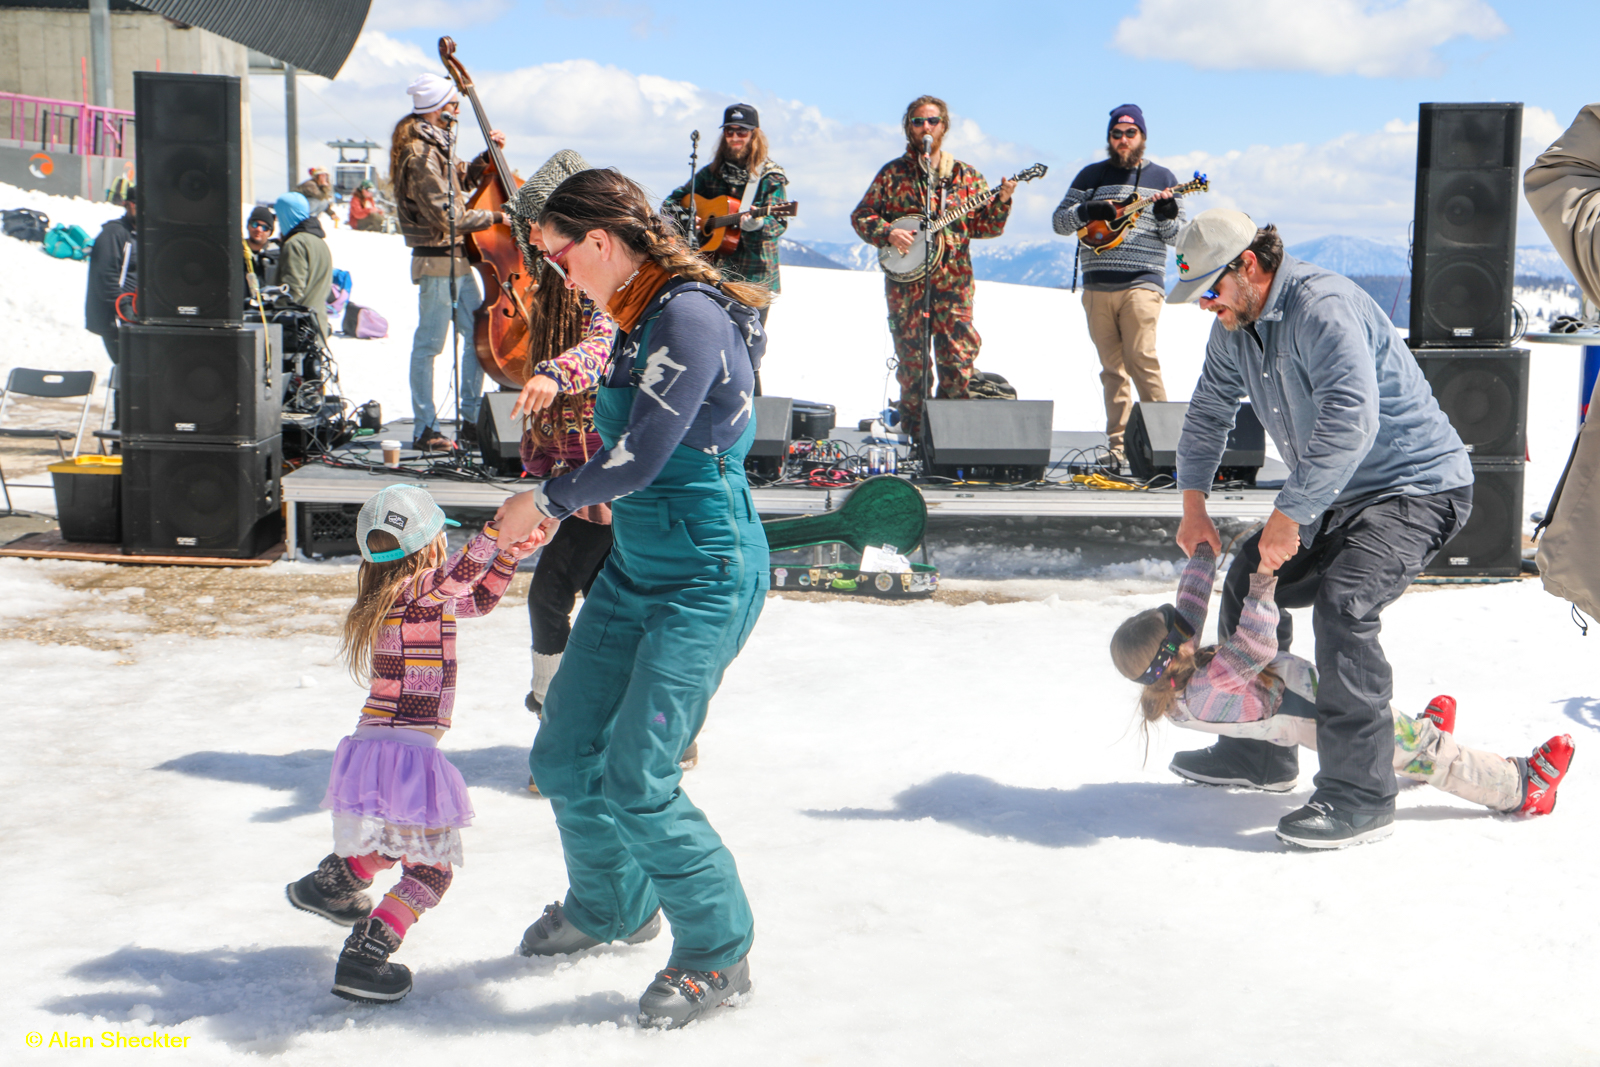 Caltucky playing for skiers/snowboarders on Sunday at the top of Palisades Tahoe’s Gold Coast futinel (tram)